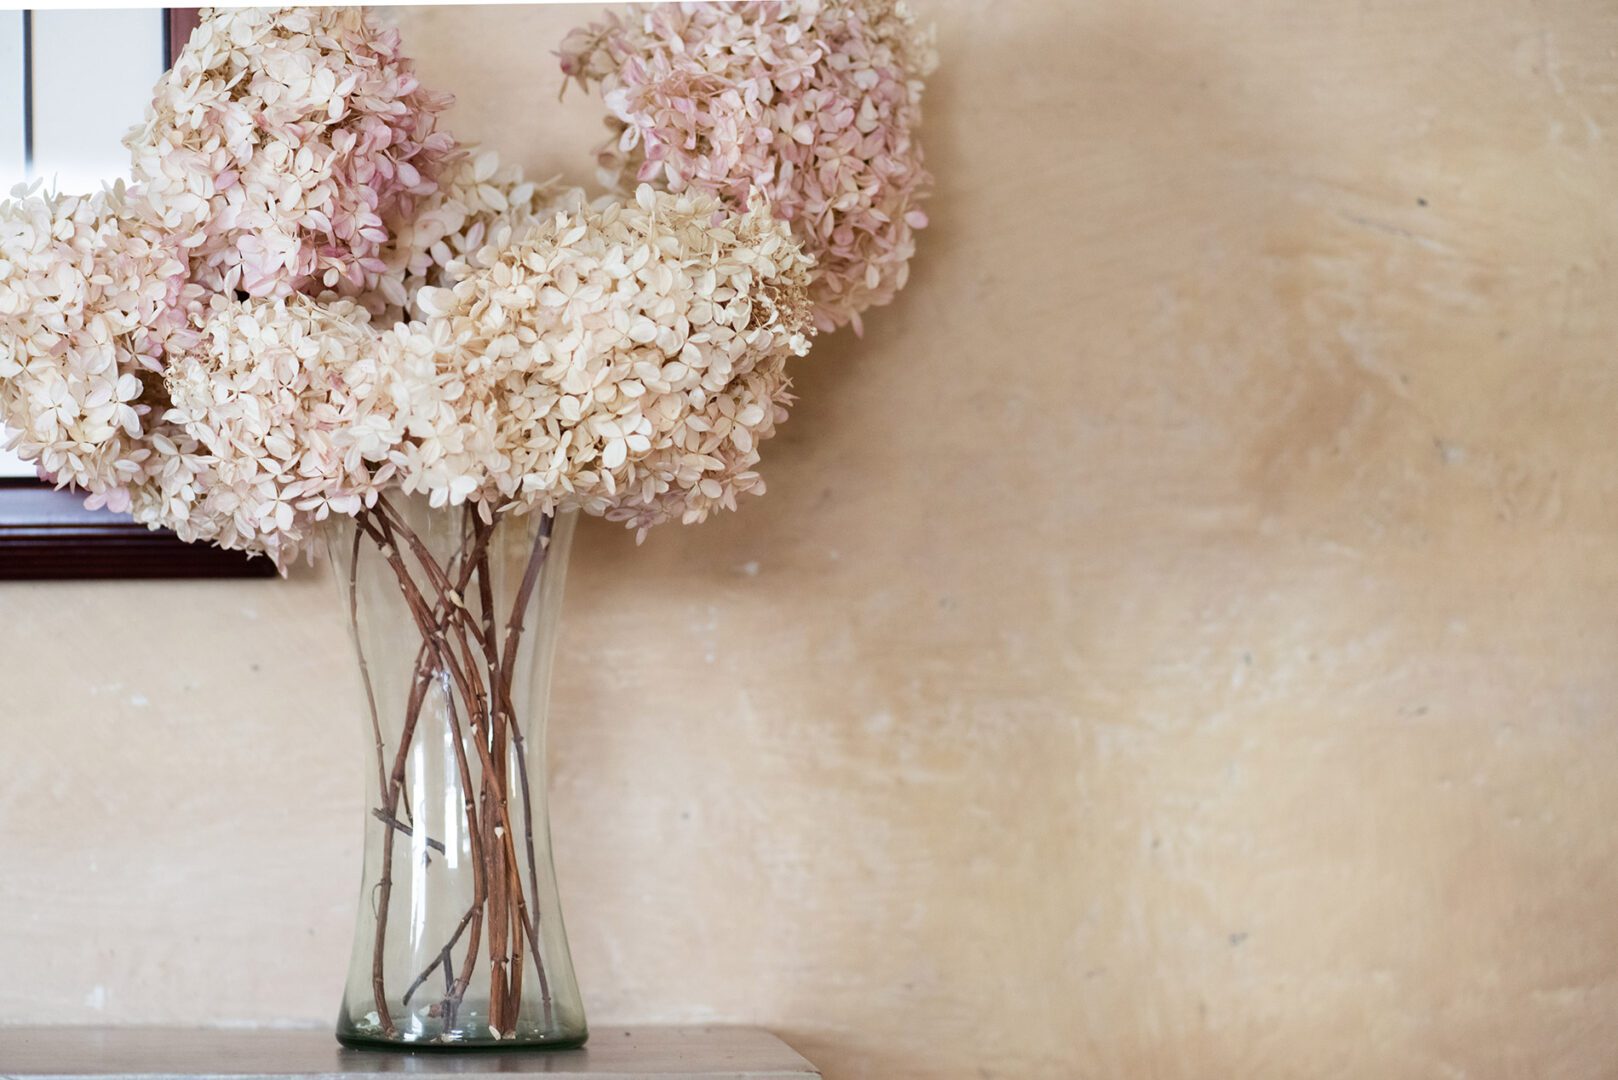 Pale pink and cream dried hydrangeas against a textured beige wall